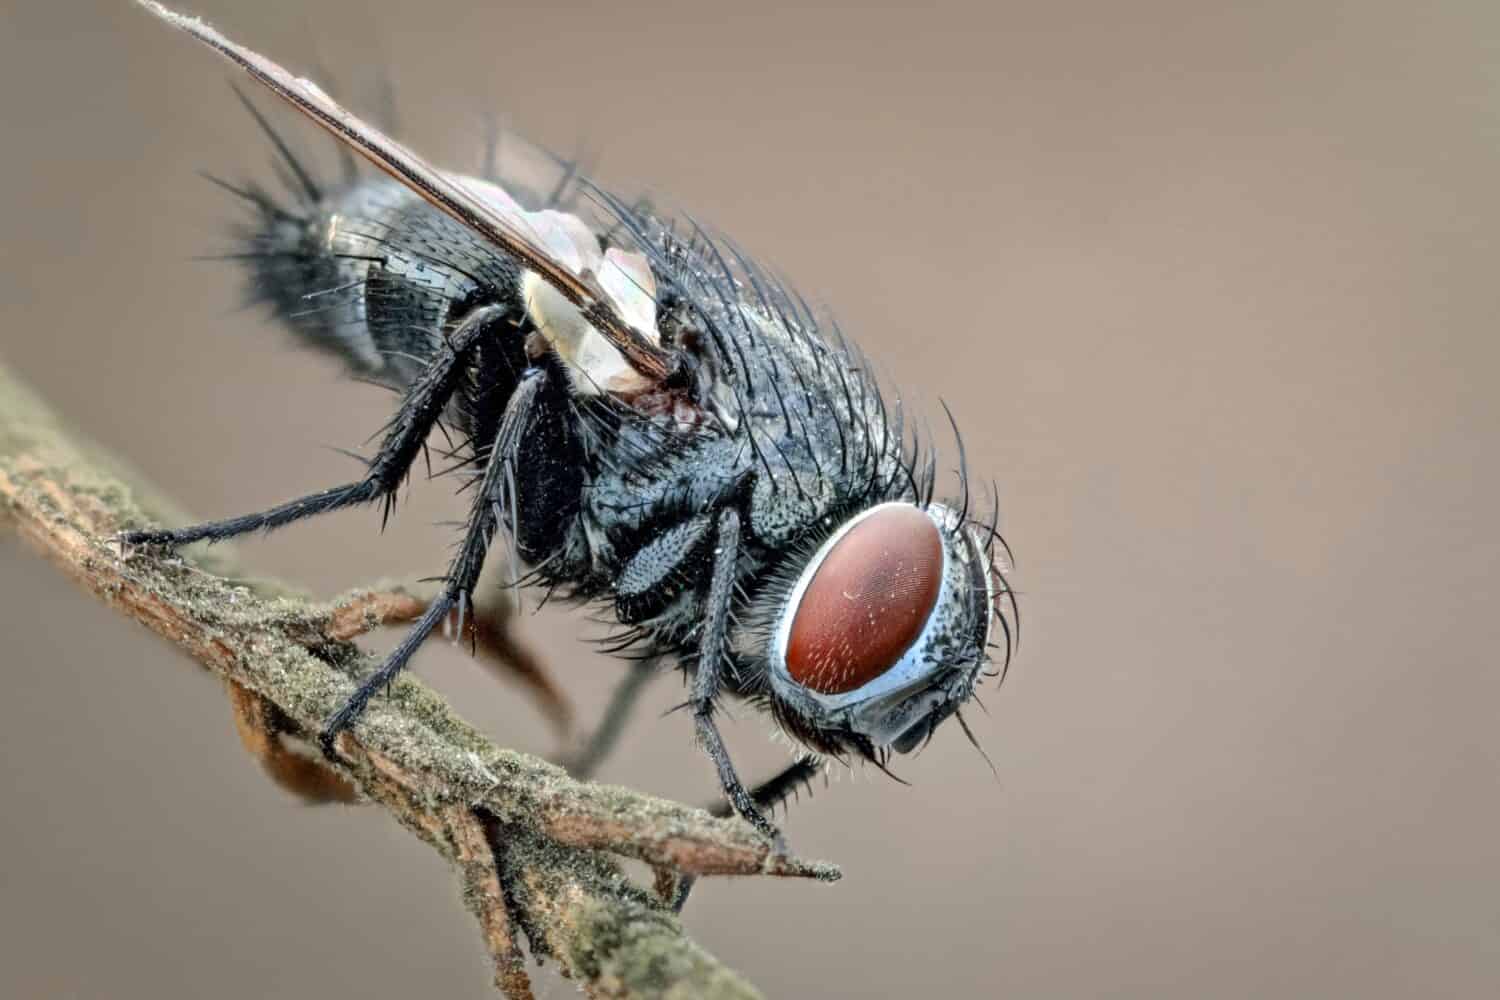 Portrait of a fly on a twig. Eyes to eyes. Macrophotography of an insect fly in its natural environment.